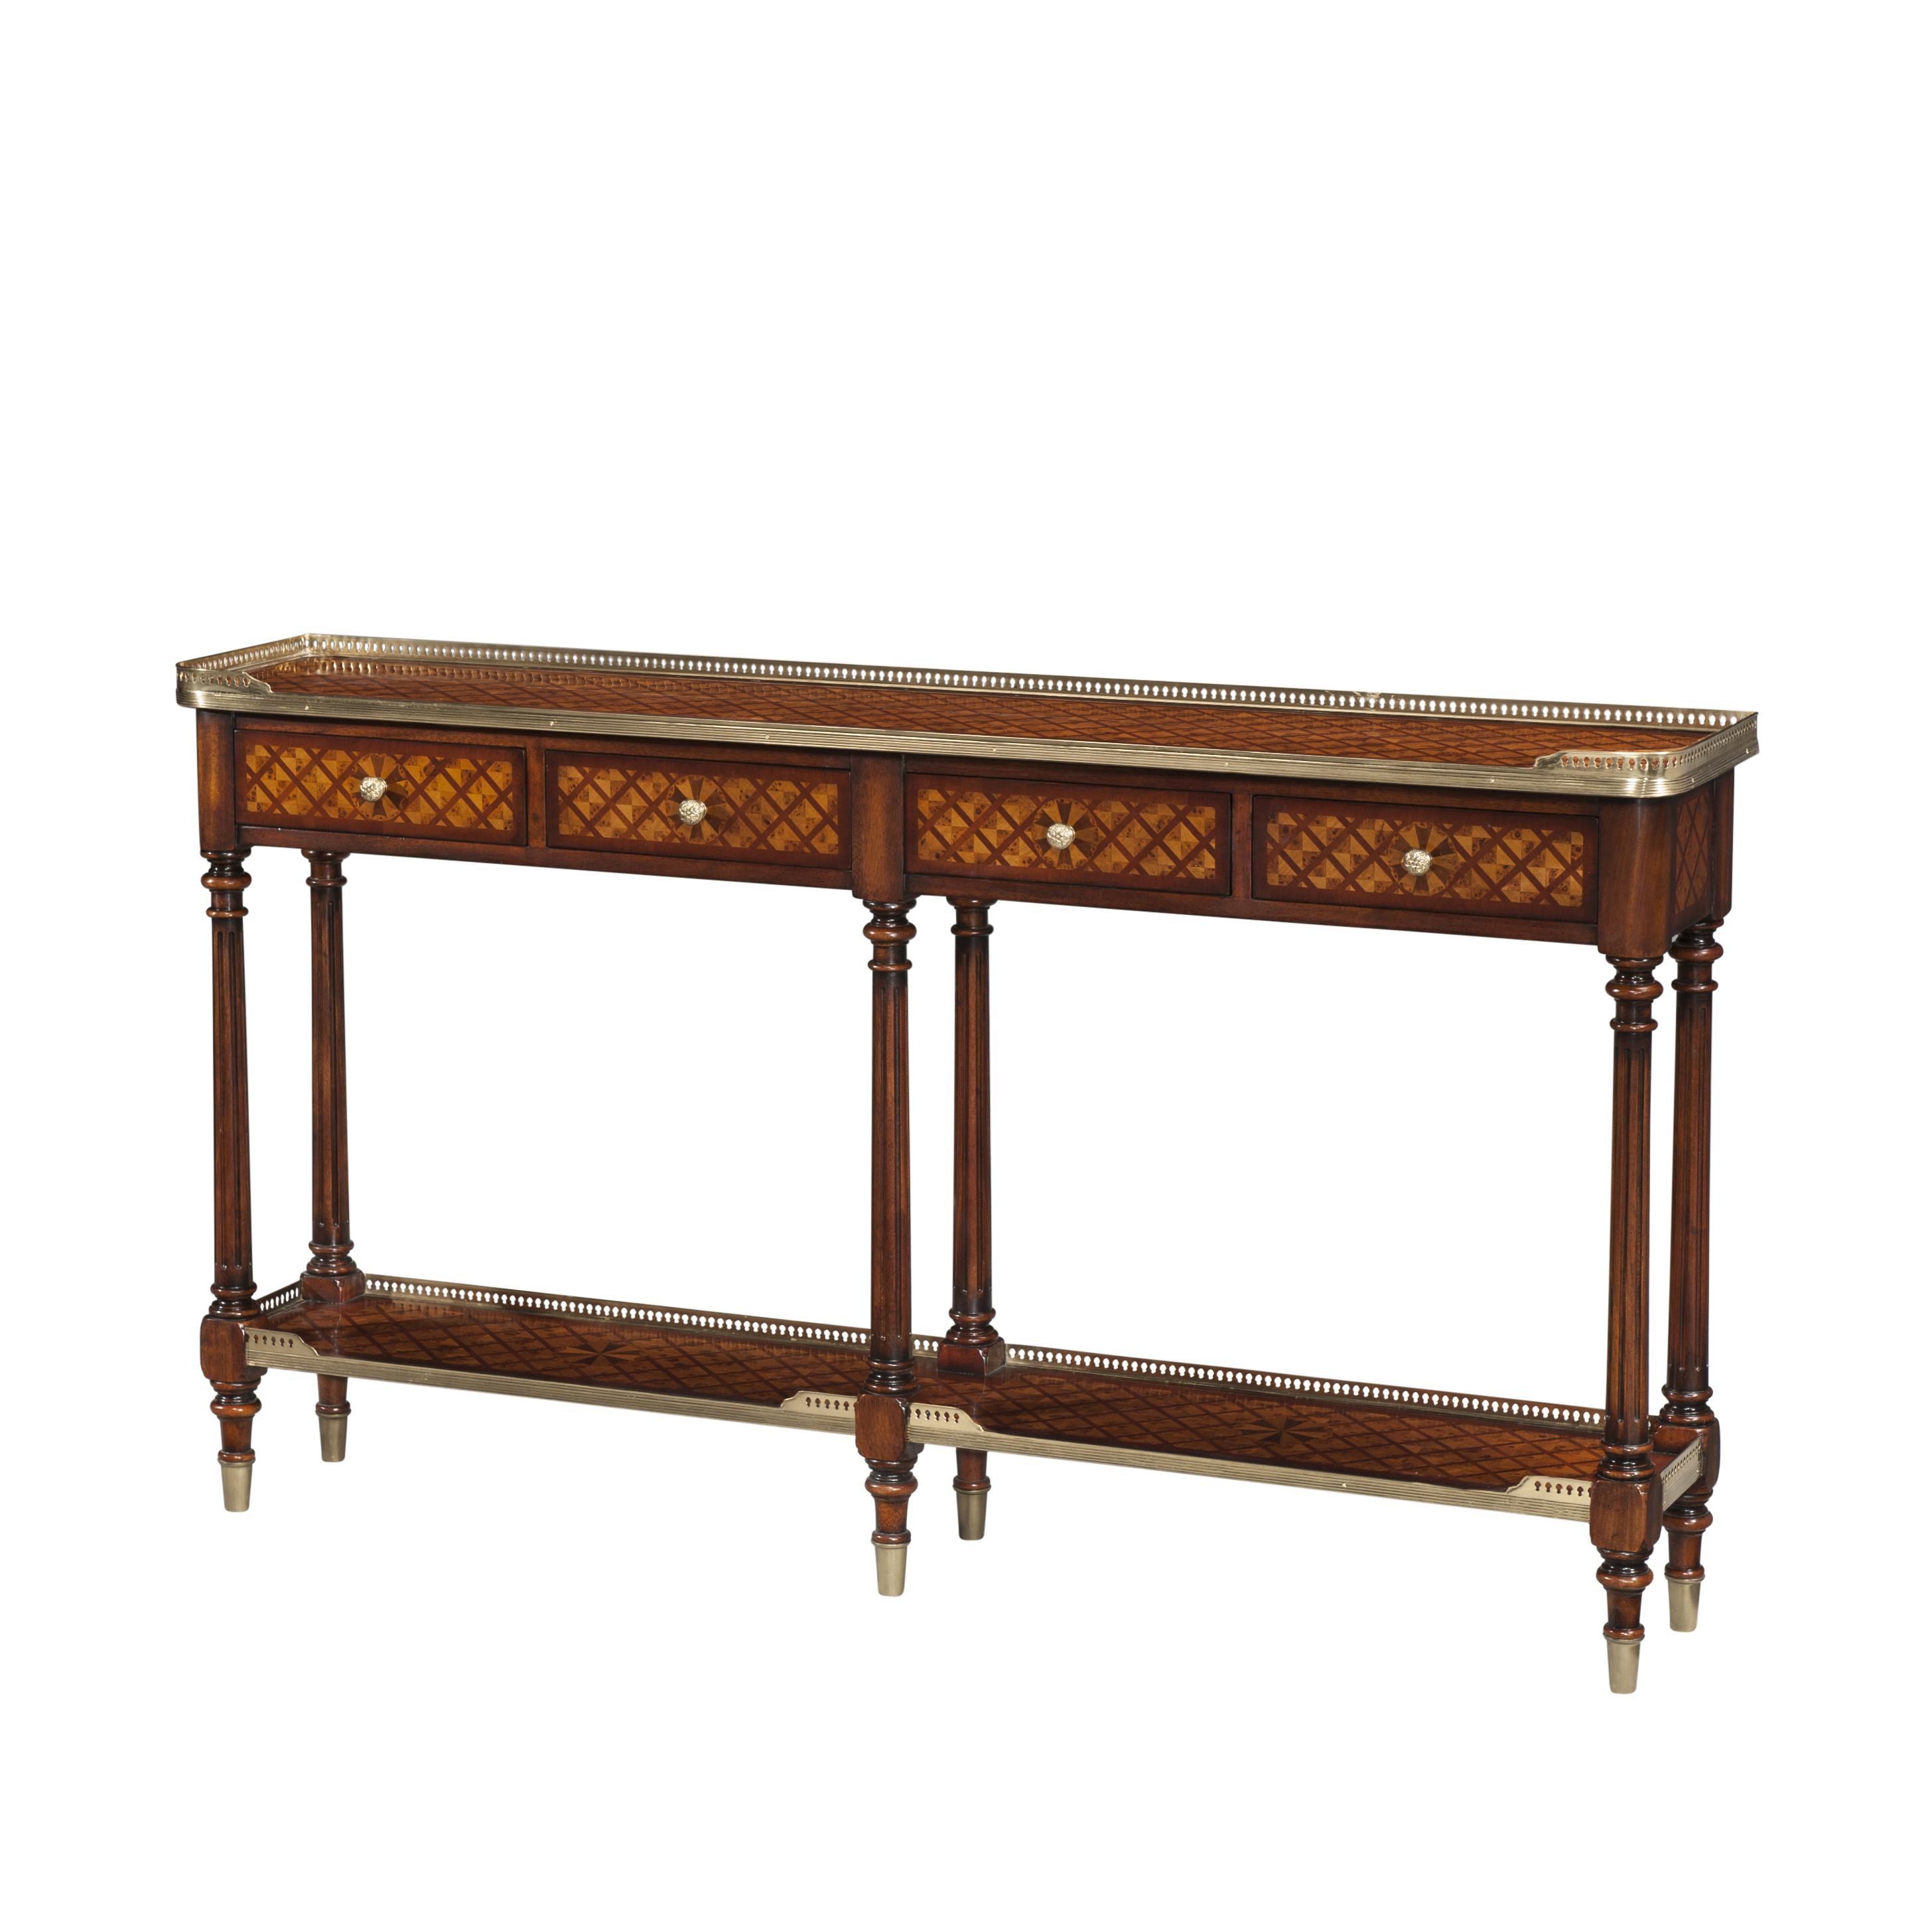 BURL LATTICE PARQUETRY, BRASS MOUNTED CONSOLE TABLE